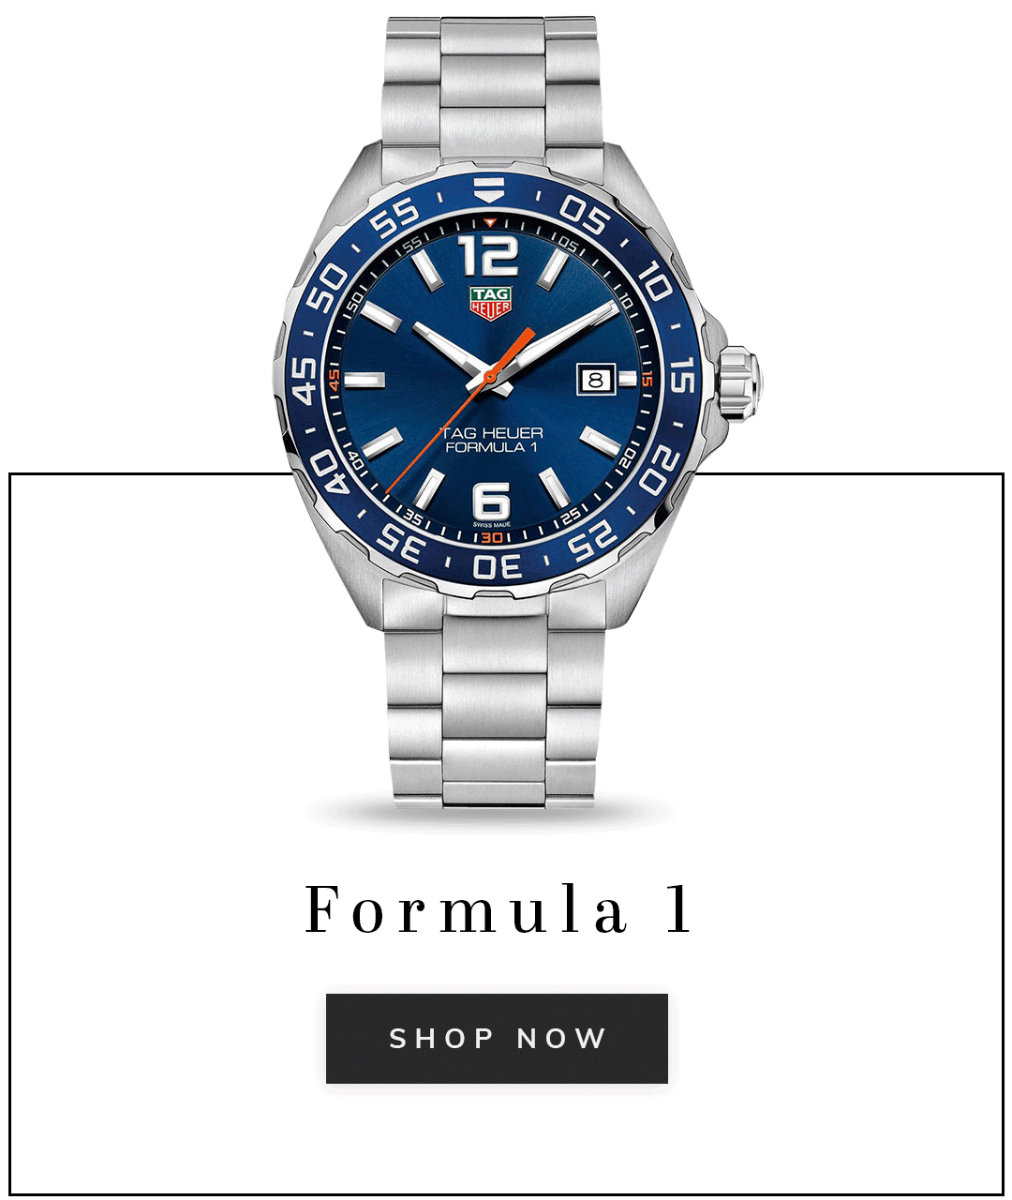 A TAG Heuer Formula one watch with a blue dial and caption Formula 1 shop now